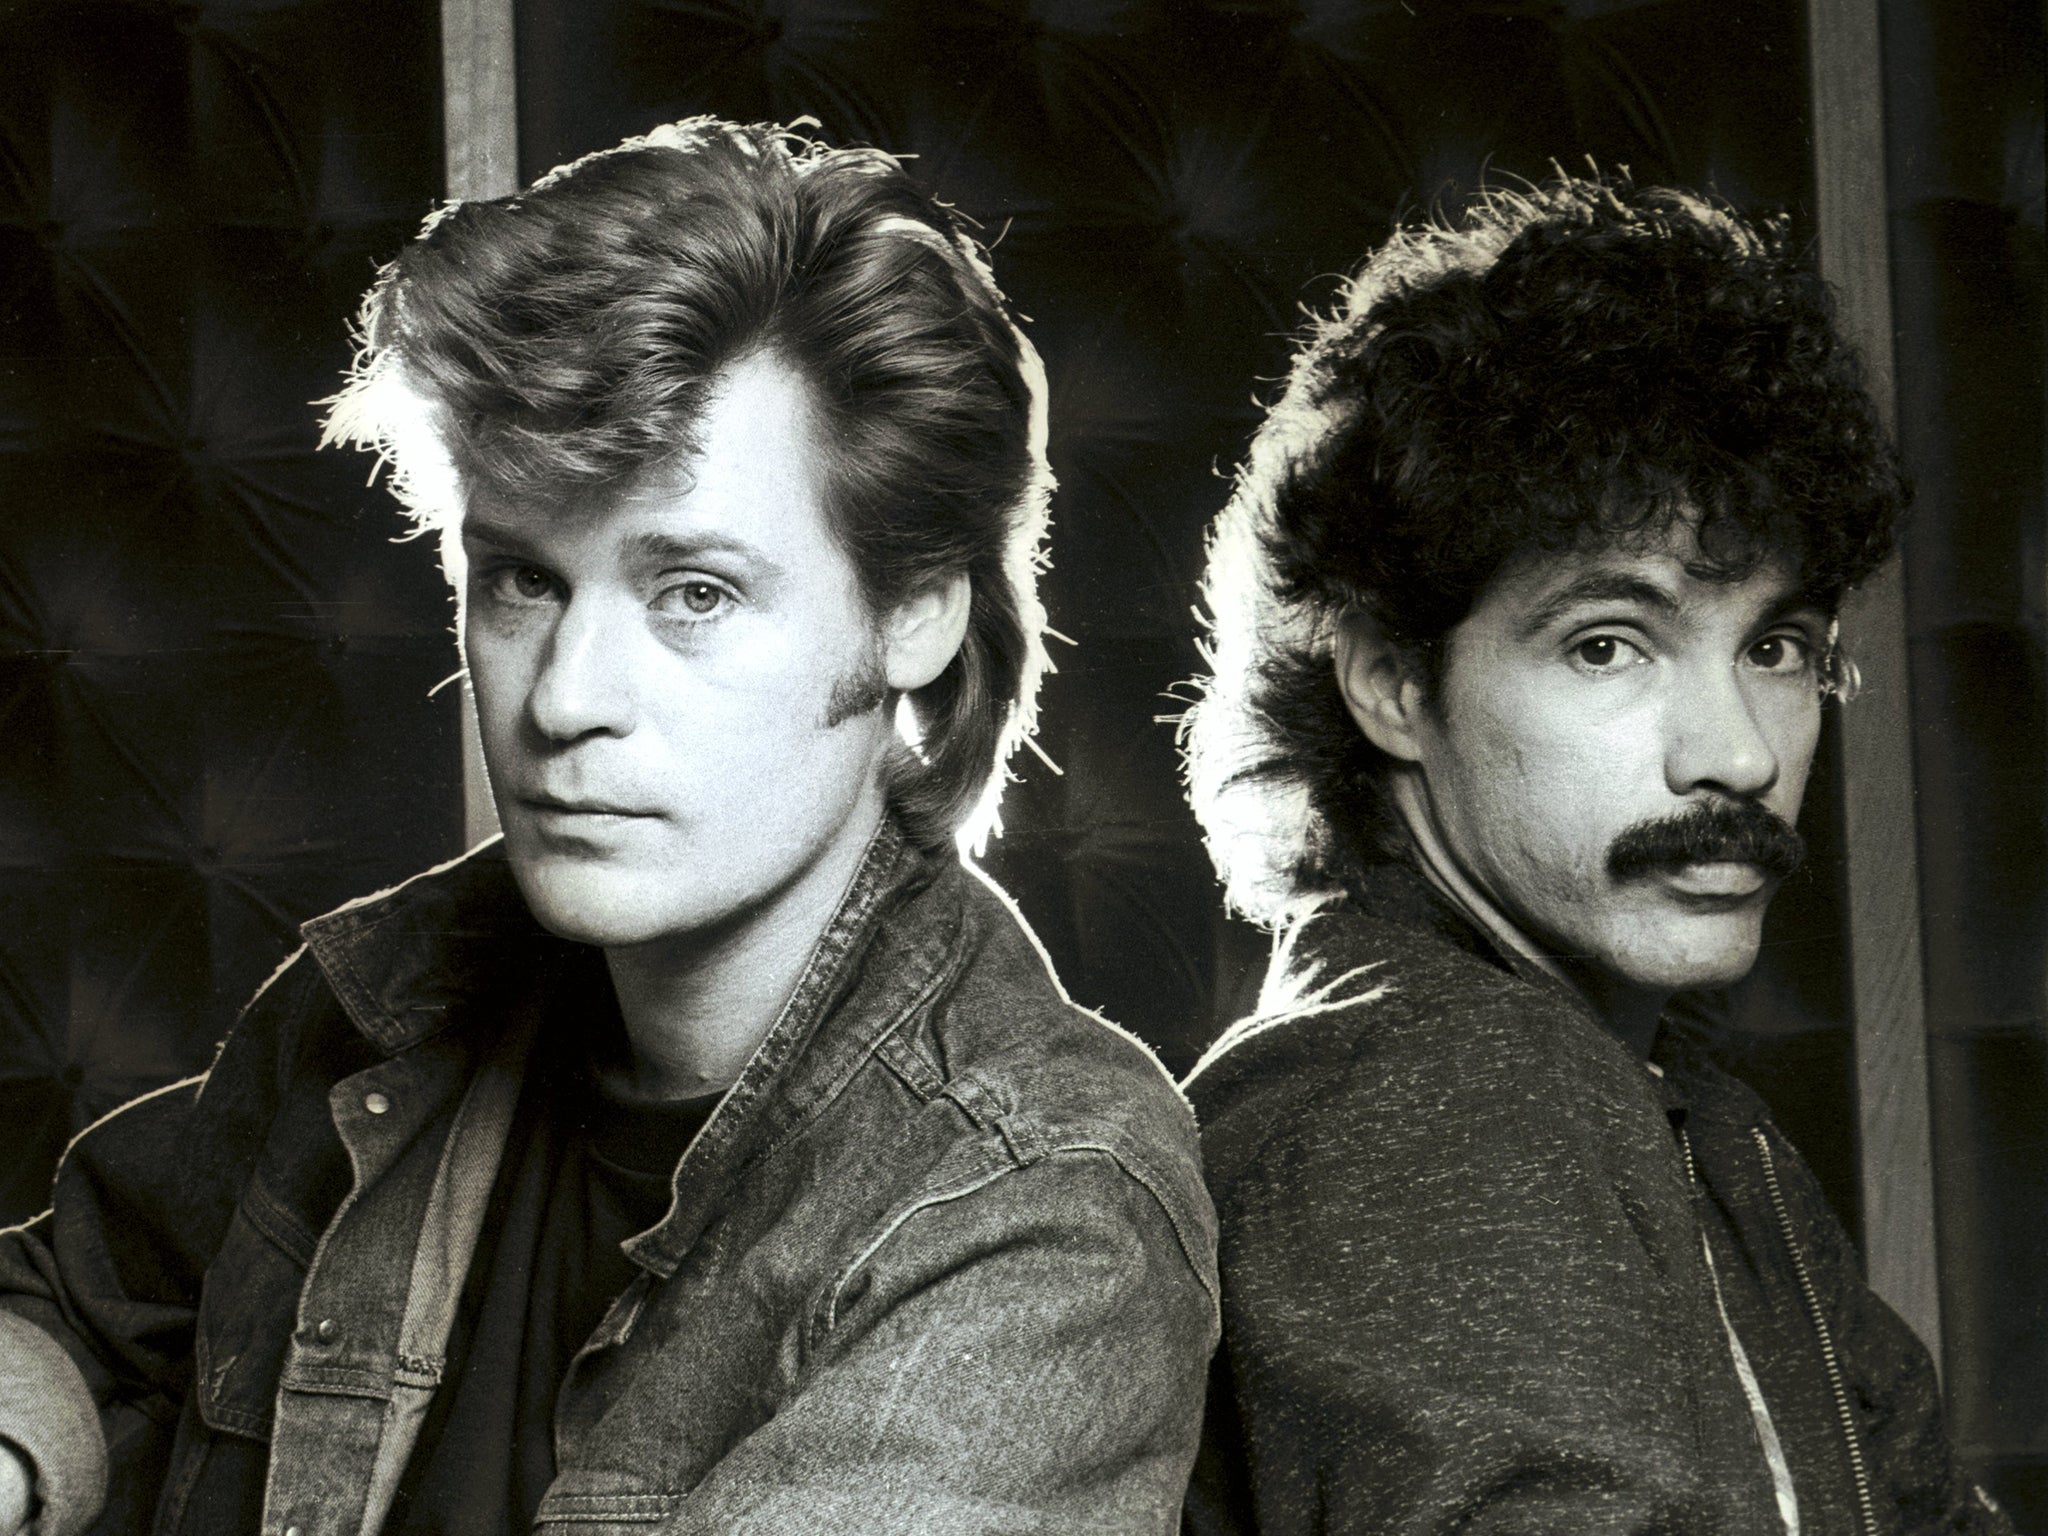 'We never wanted to be stars': Daryl Hall and John Oates in 1982